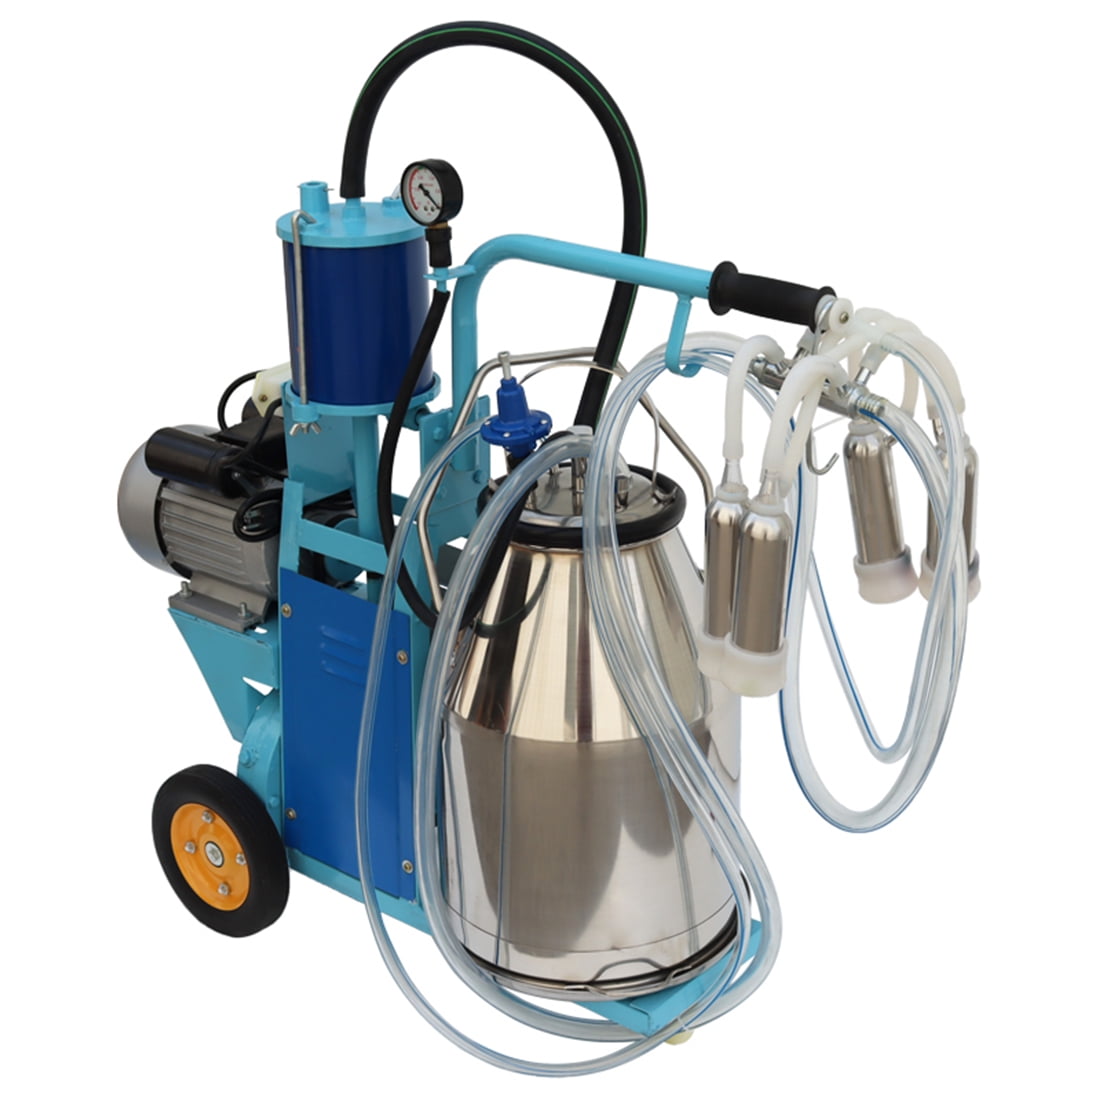 Piston Milker Electric Milking Machine Stainless Steel Bucket For Cows and Goats 